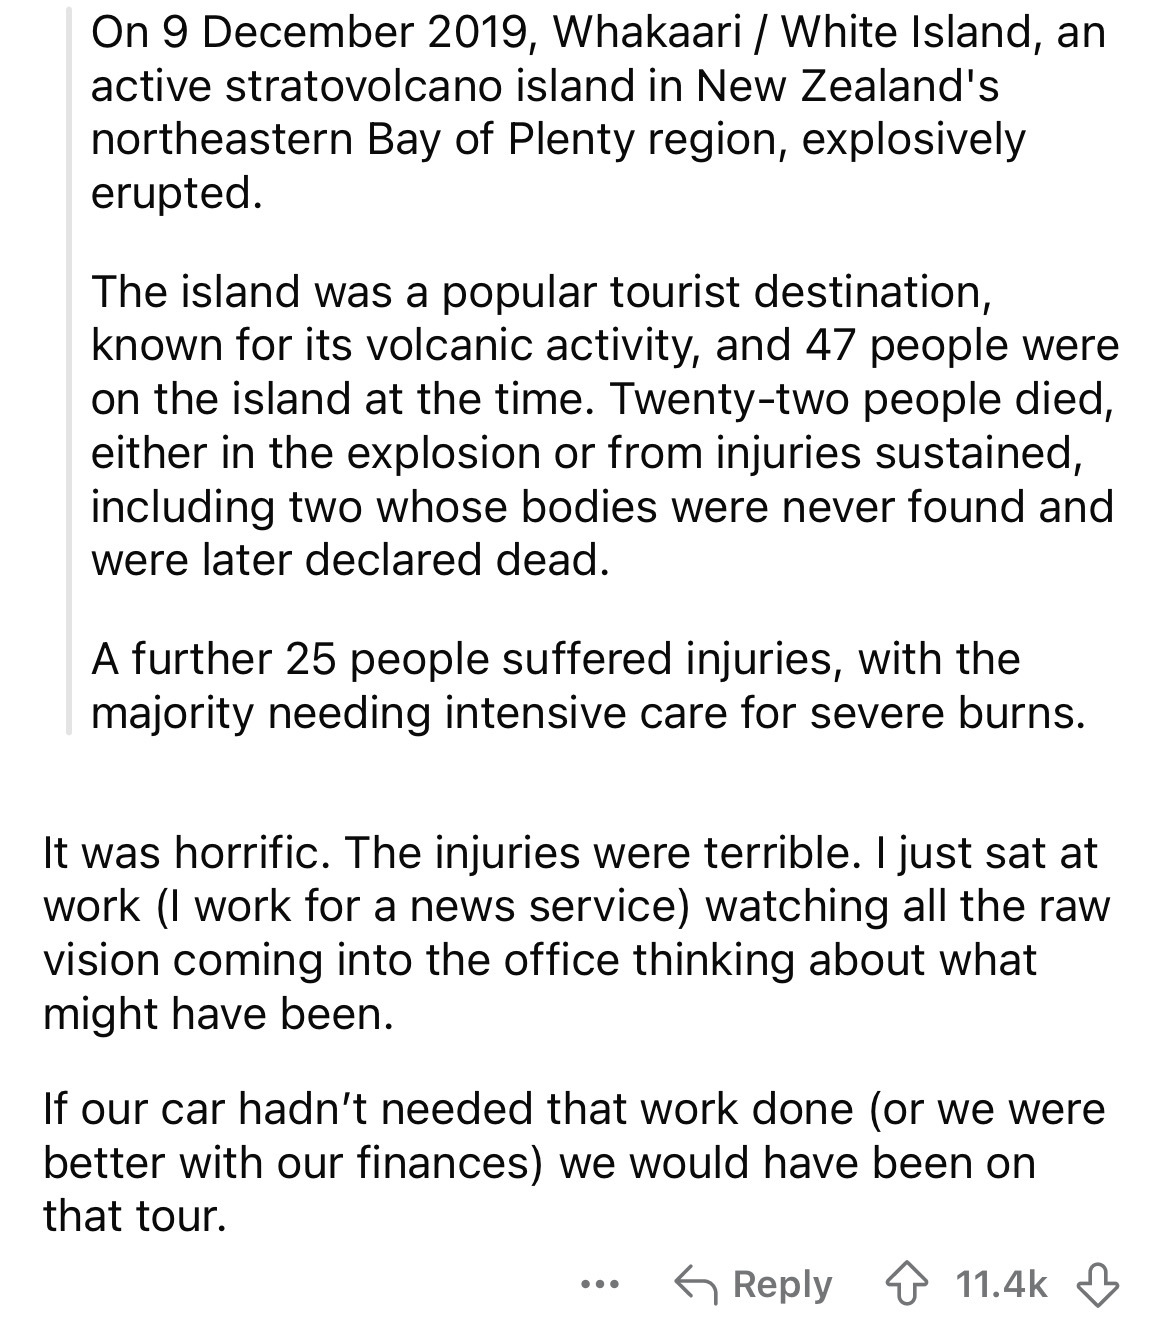 document - On , Whakaari White Island, an active stratovolcano island in New Zealand's northeastern Bay of Plenty region, explosively erupted. The island was a popular tourist destination, known for its volcanic activity, and 47 people were on the island 